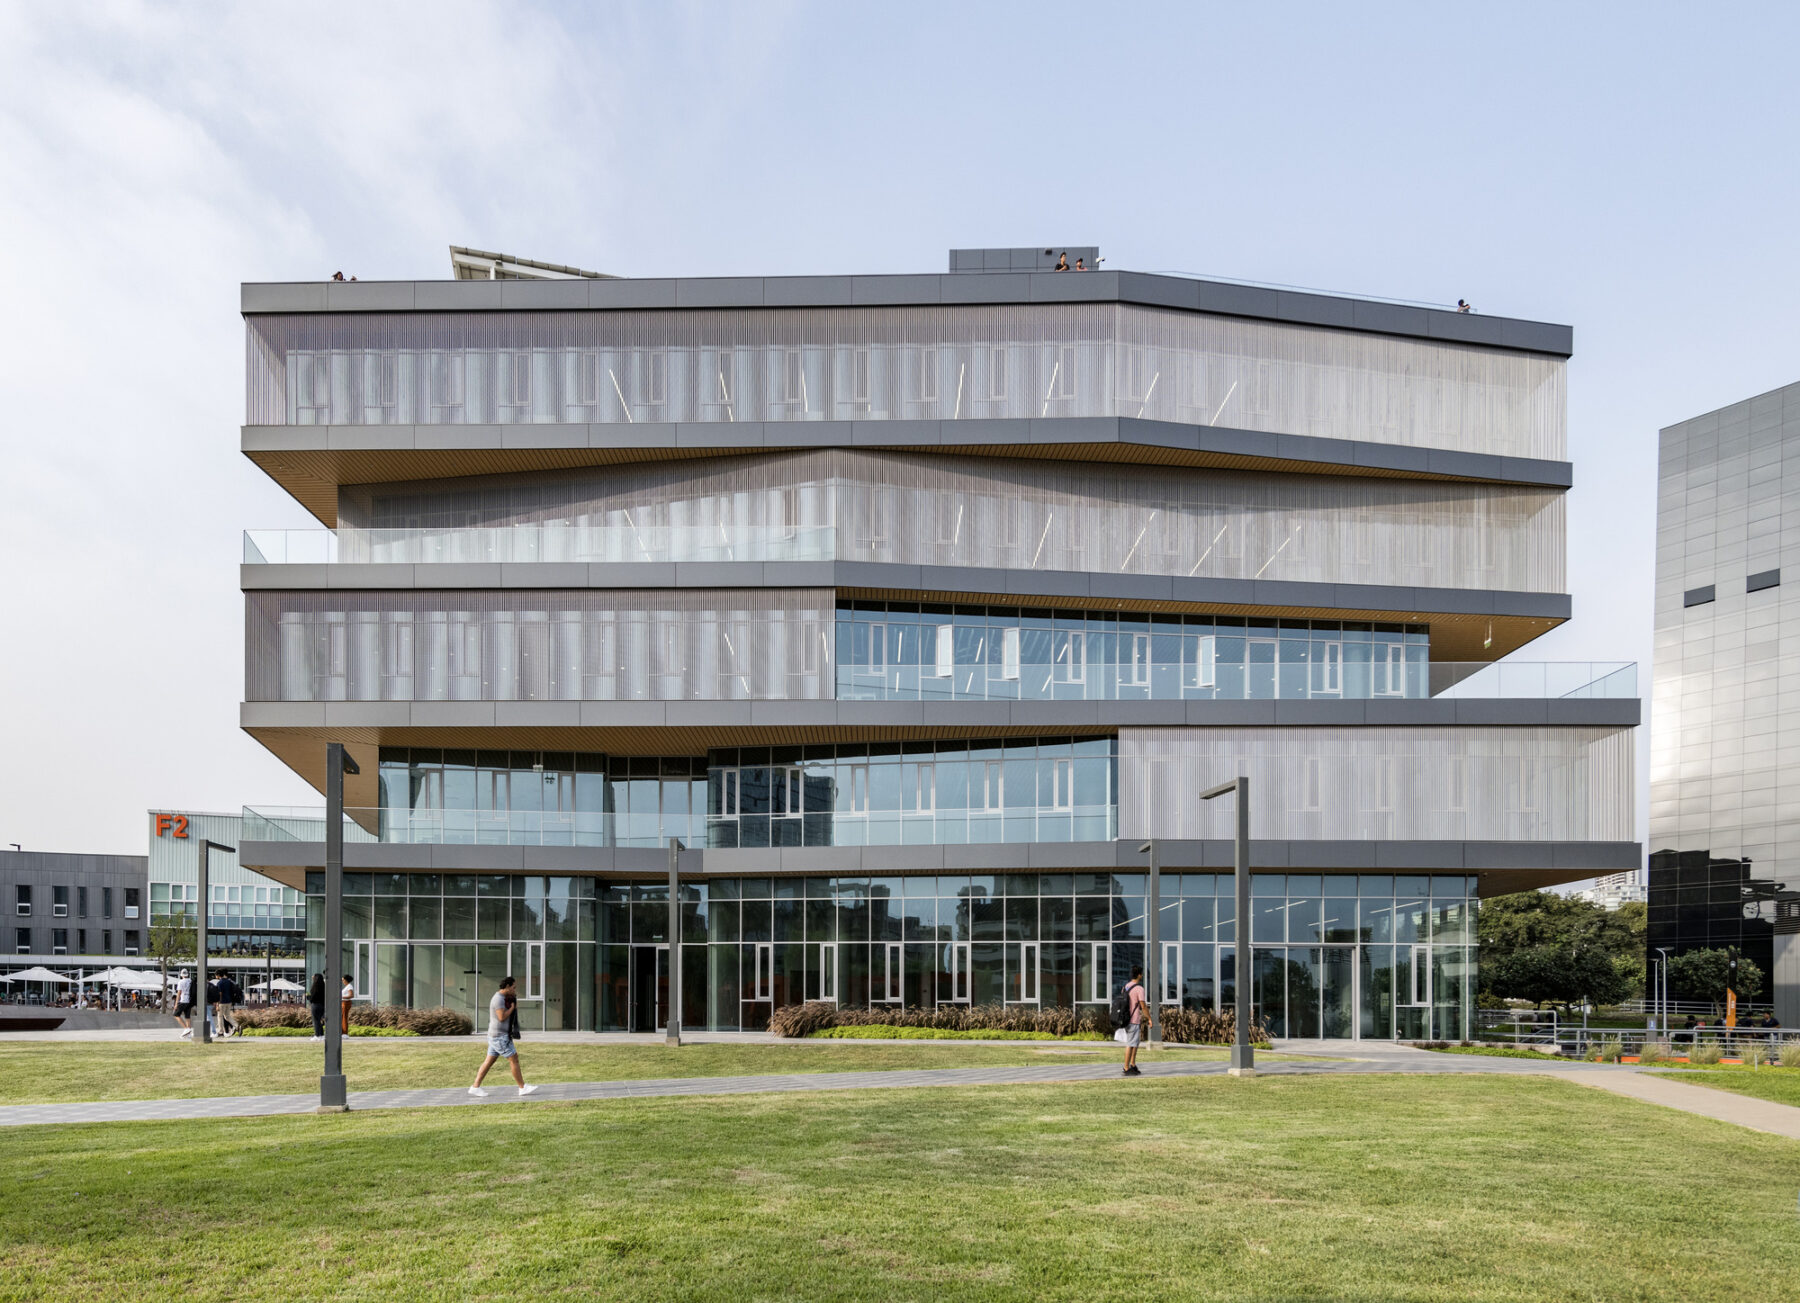 Photograph of west facade of engineering innovation center